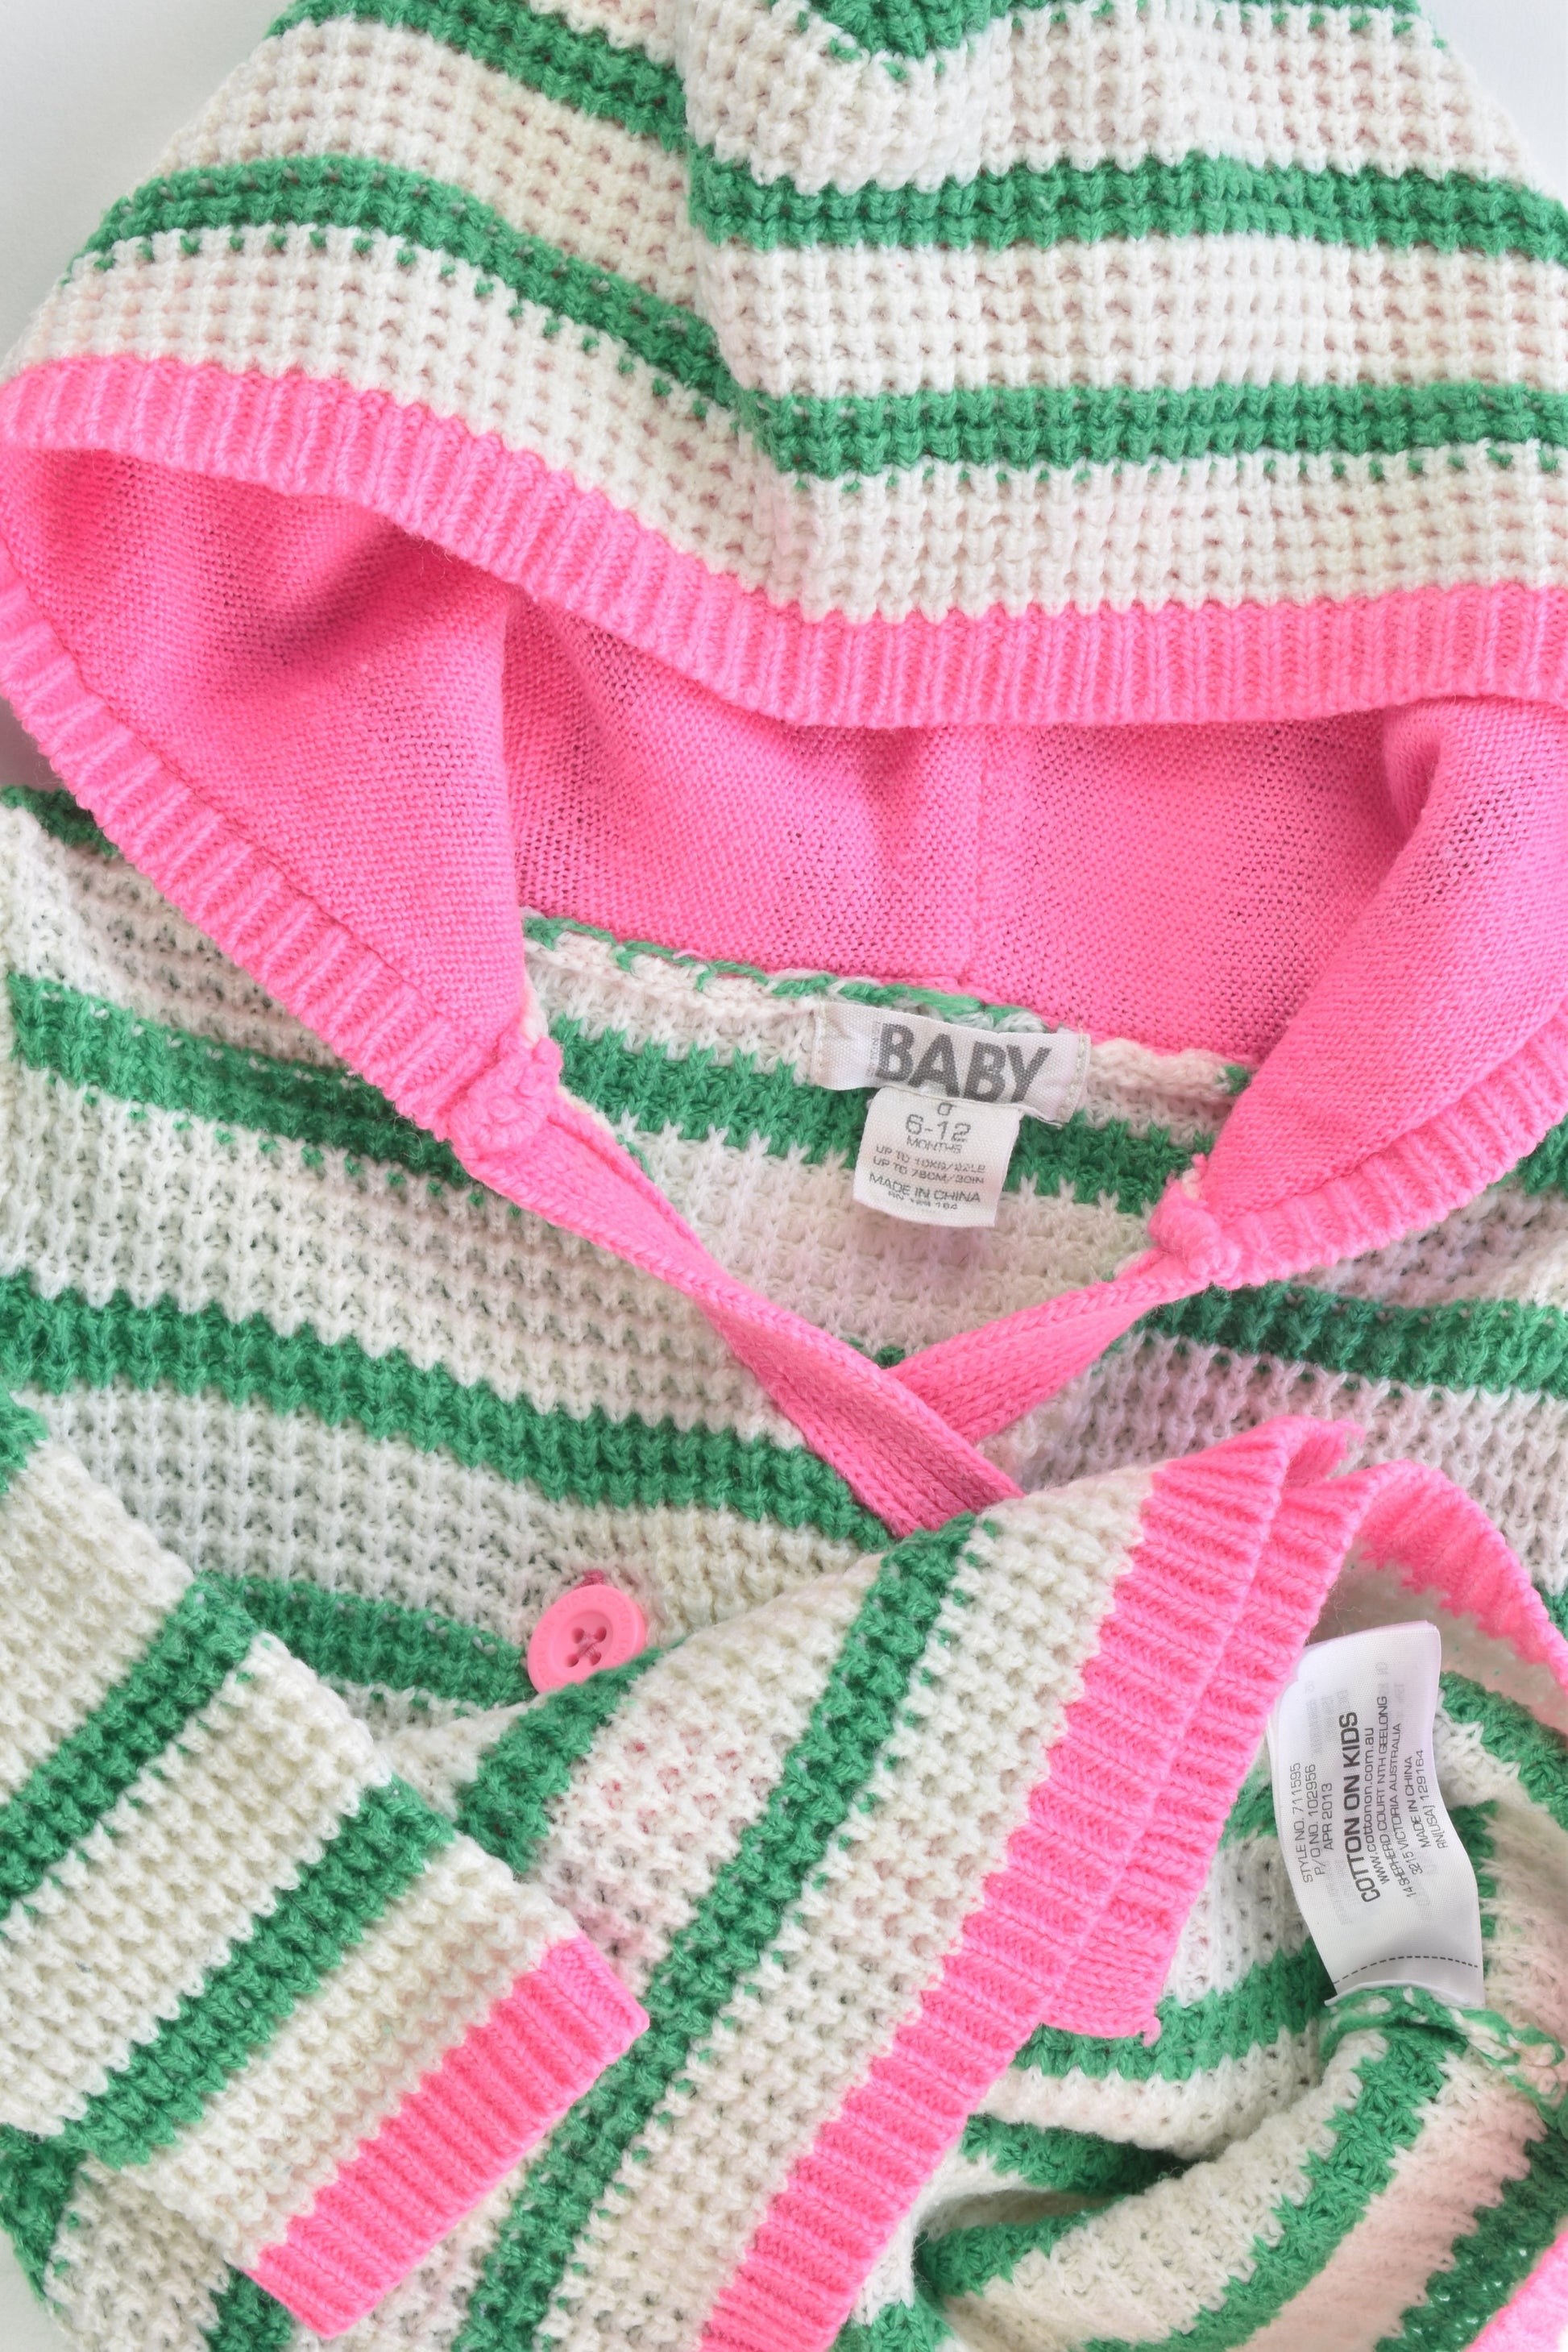 Cotton On Baby Size 0 (6-12 months) Knitted Hooded Jumper